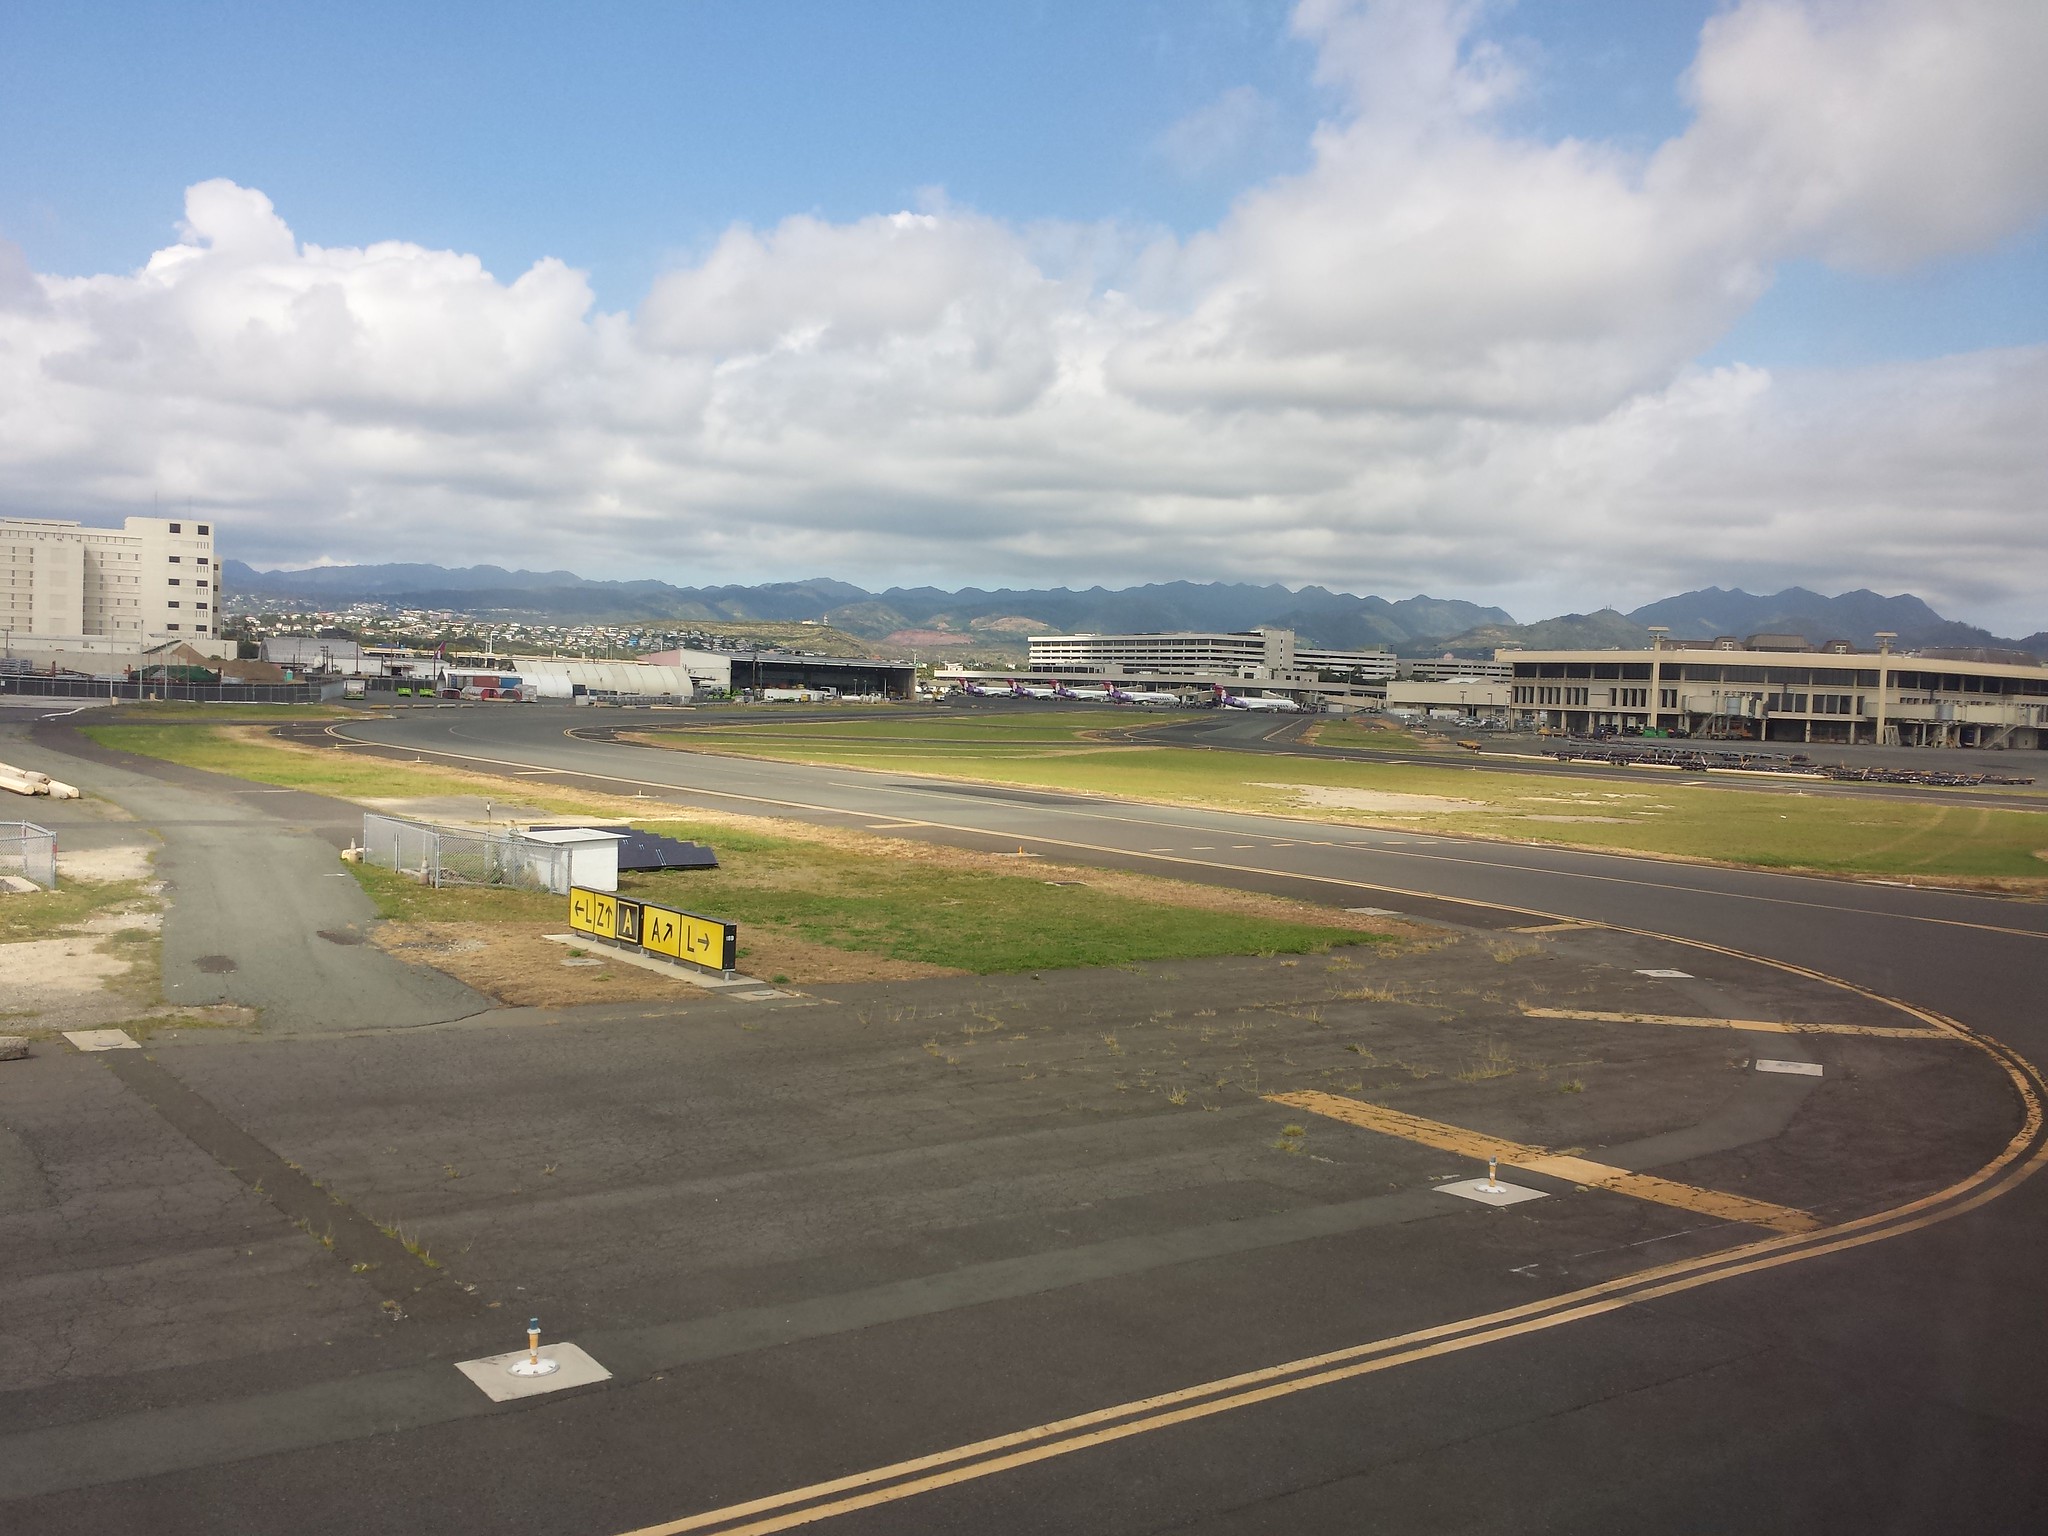 Taxiing at Honolulu airport